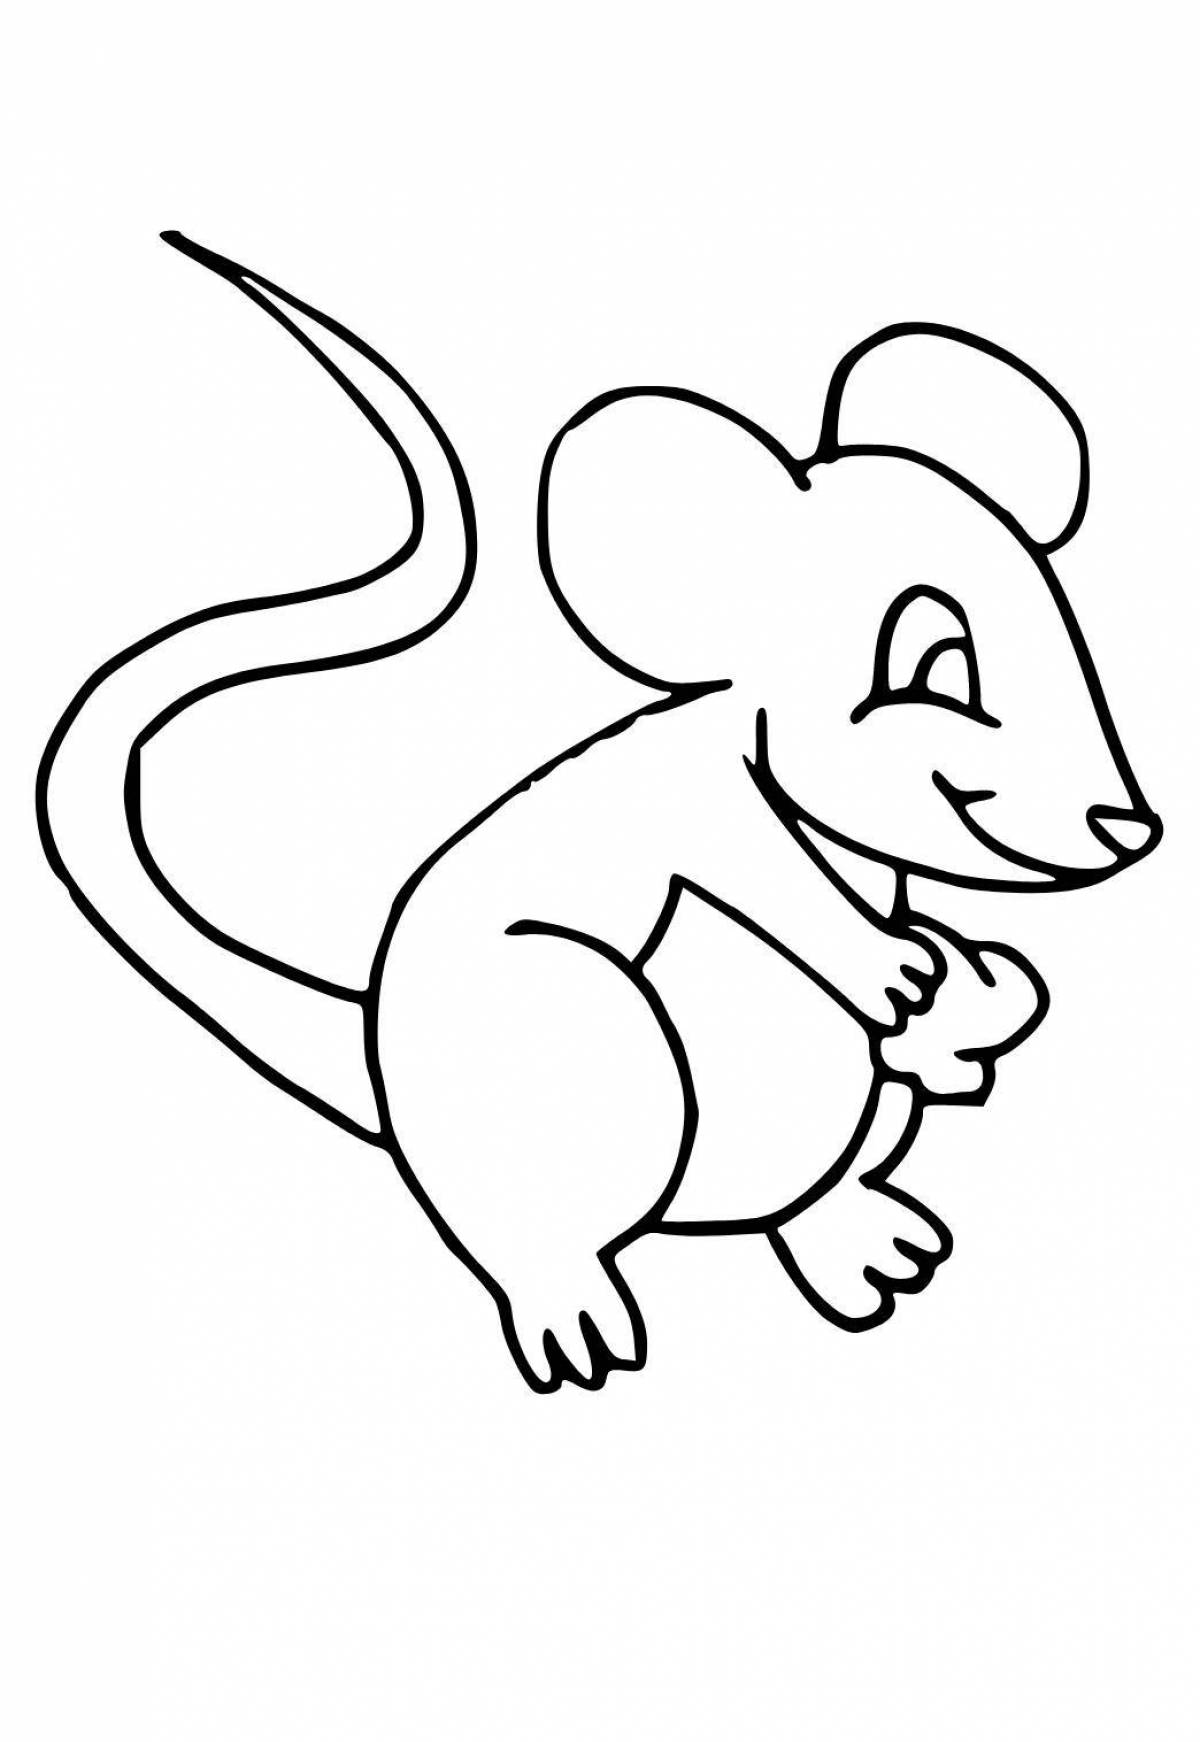 Adorable mouse coloring book for 3-4 year olds